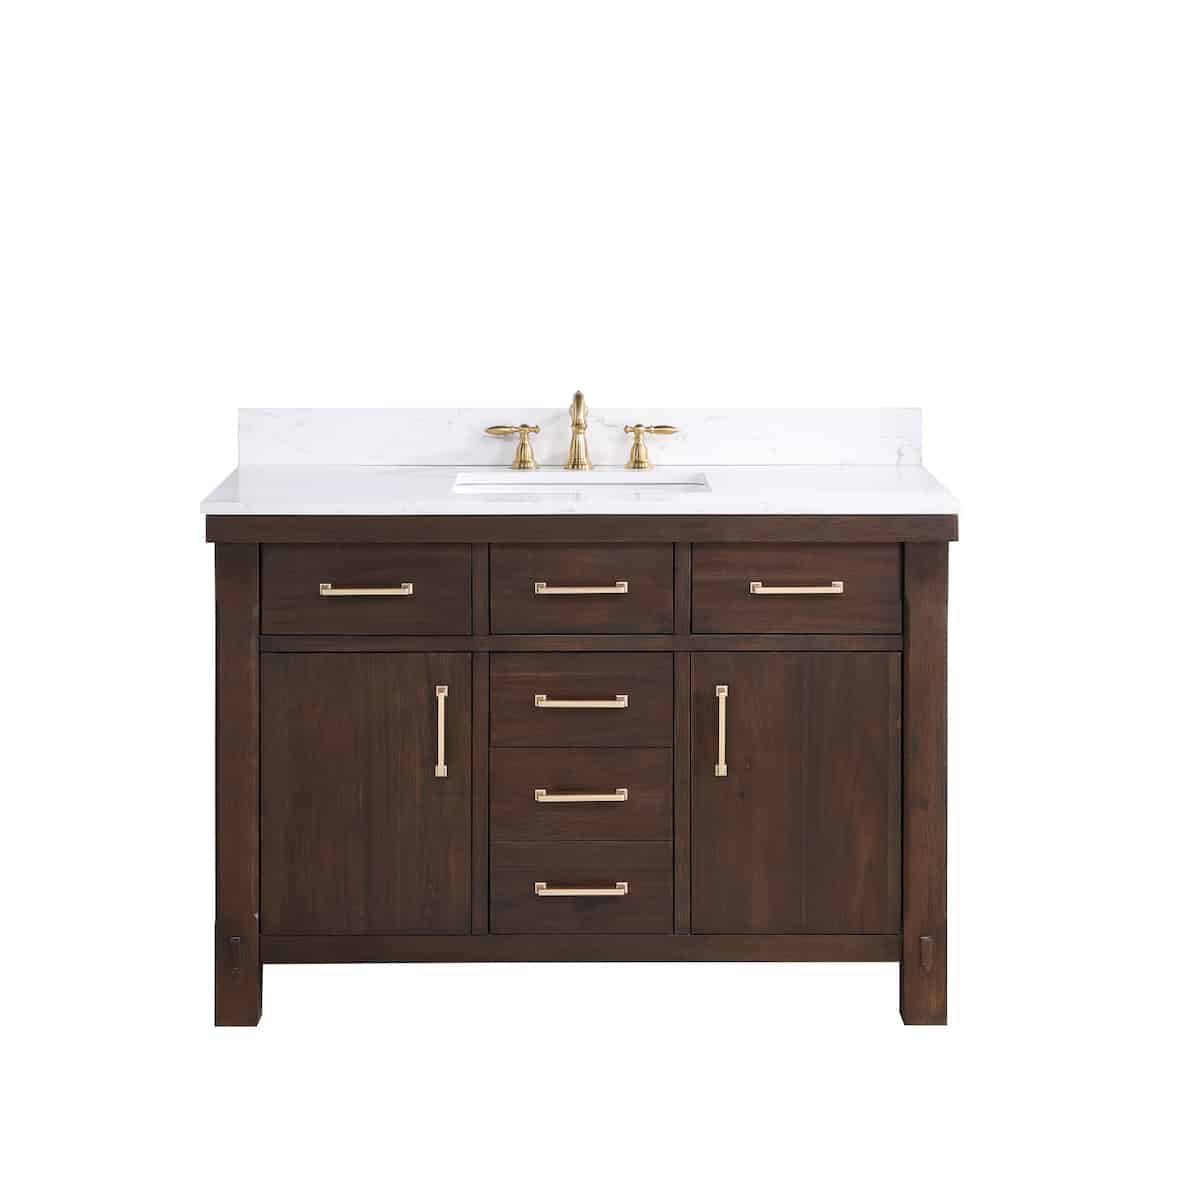 Vinnova Viella 48 Inch Freestanding Single Sink Bath Vanity in Deep Walnut Finish with White Composite Countertop Without Mirror 701848-DW-WS-NM